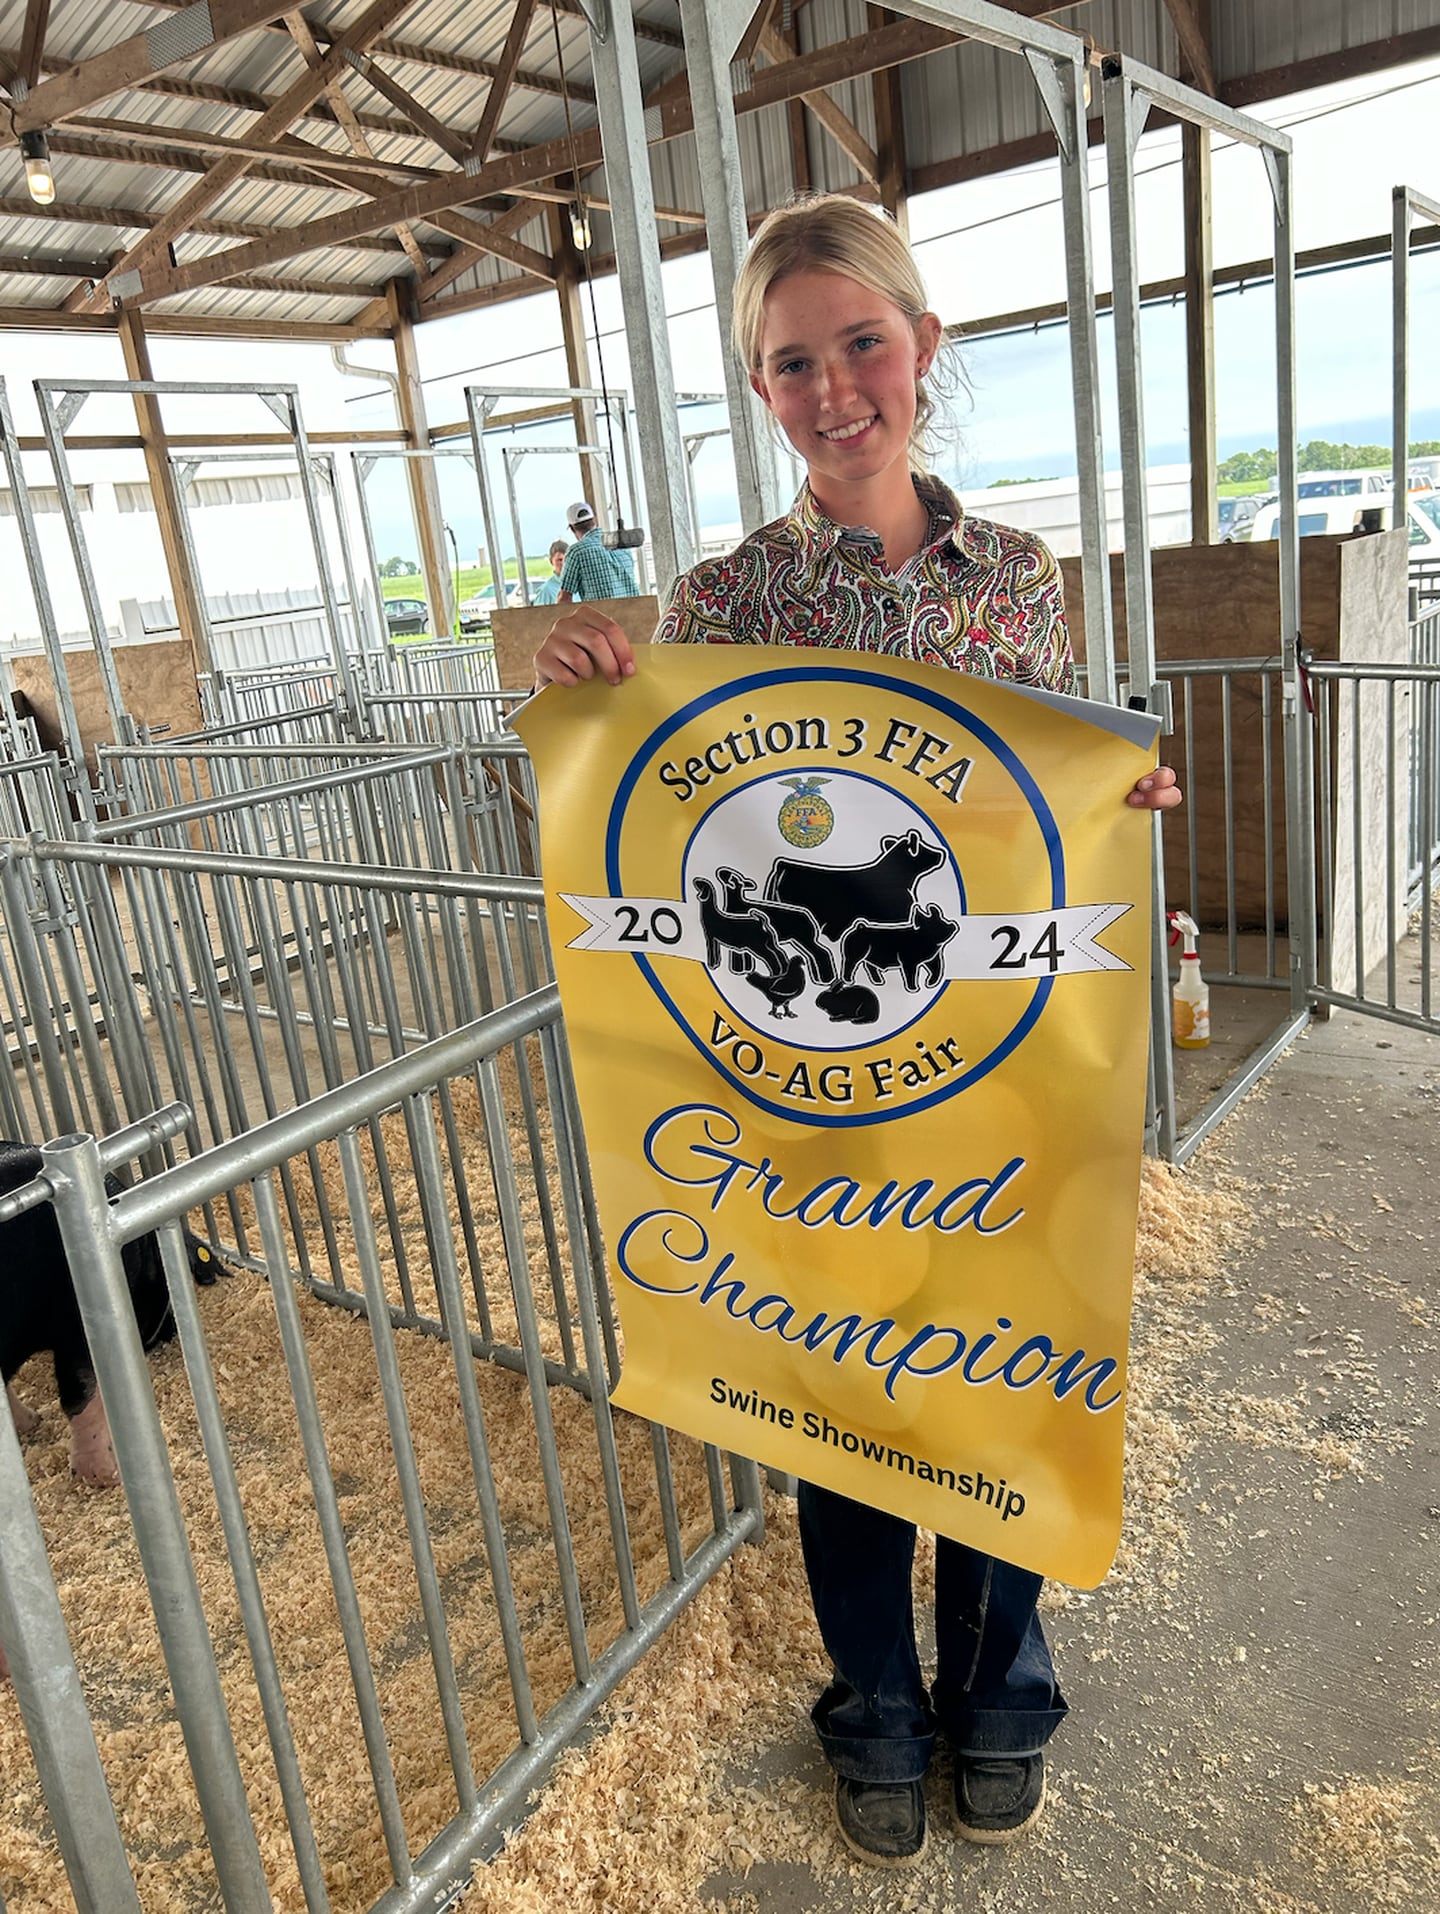 Princeton High School's Payton Frueh placed first for Purebred Breeding Gilts from the Swine Show held at the Cambridge Fairgrounds. She was also a Grand Champion in the Horse Show and Showmanship.